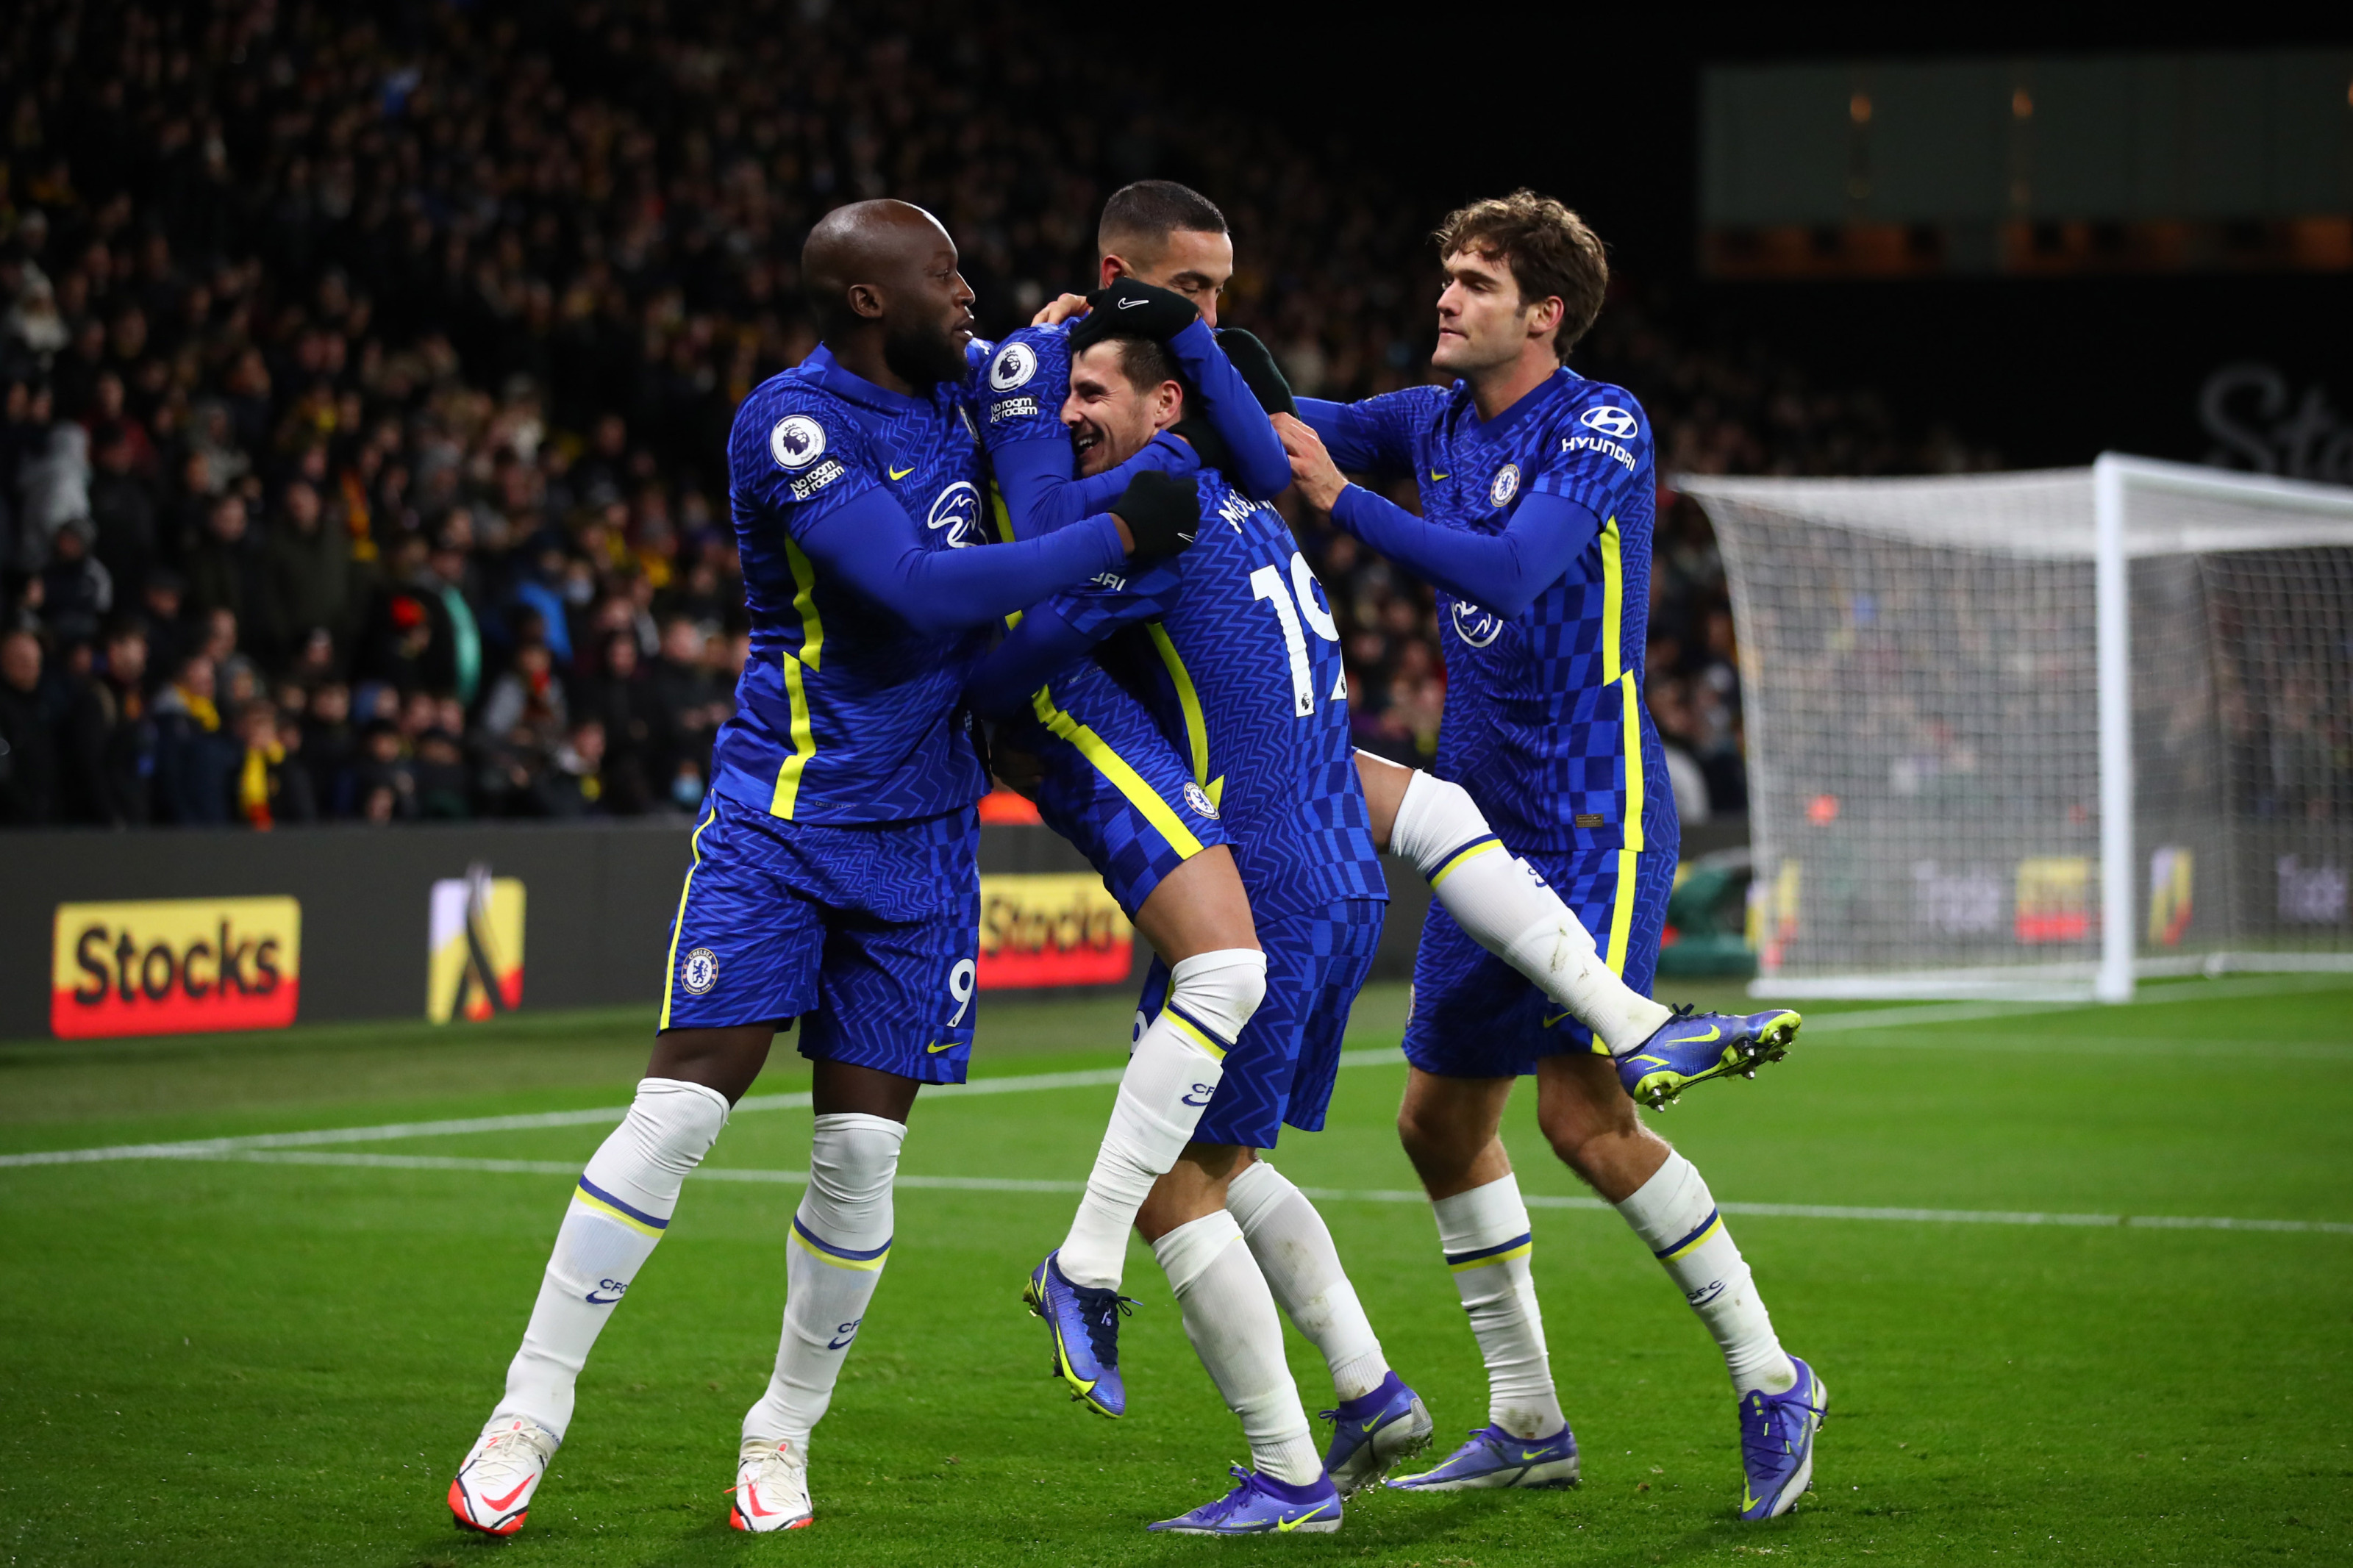 Three things to look for in Chelsea vs Leeds United